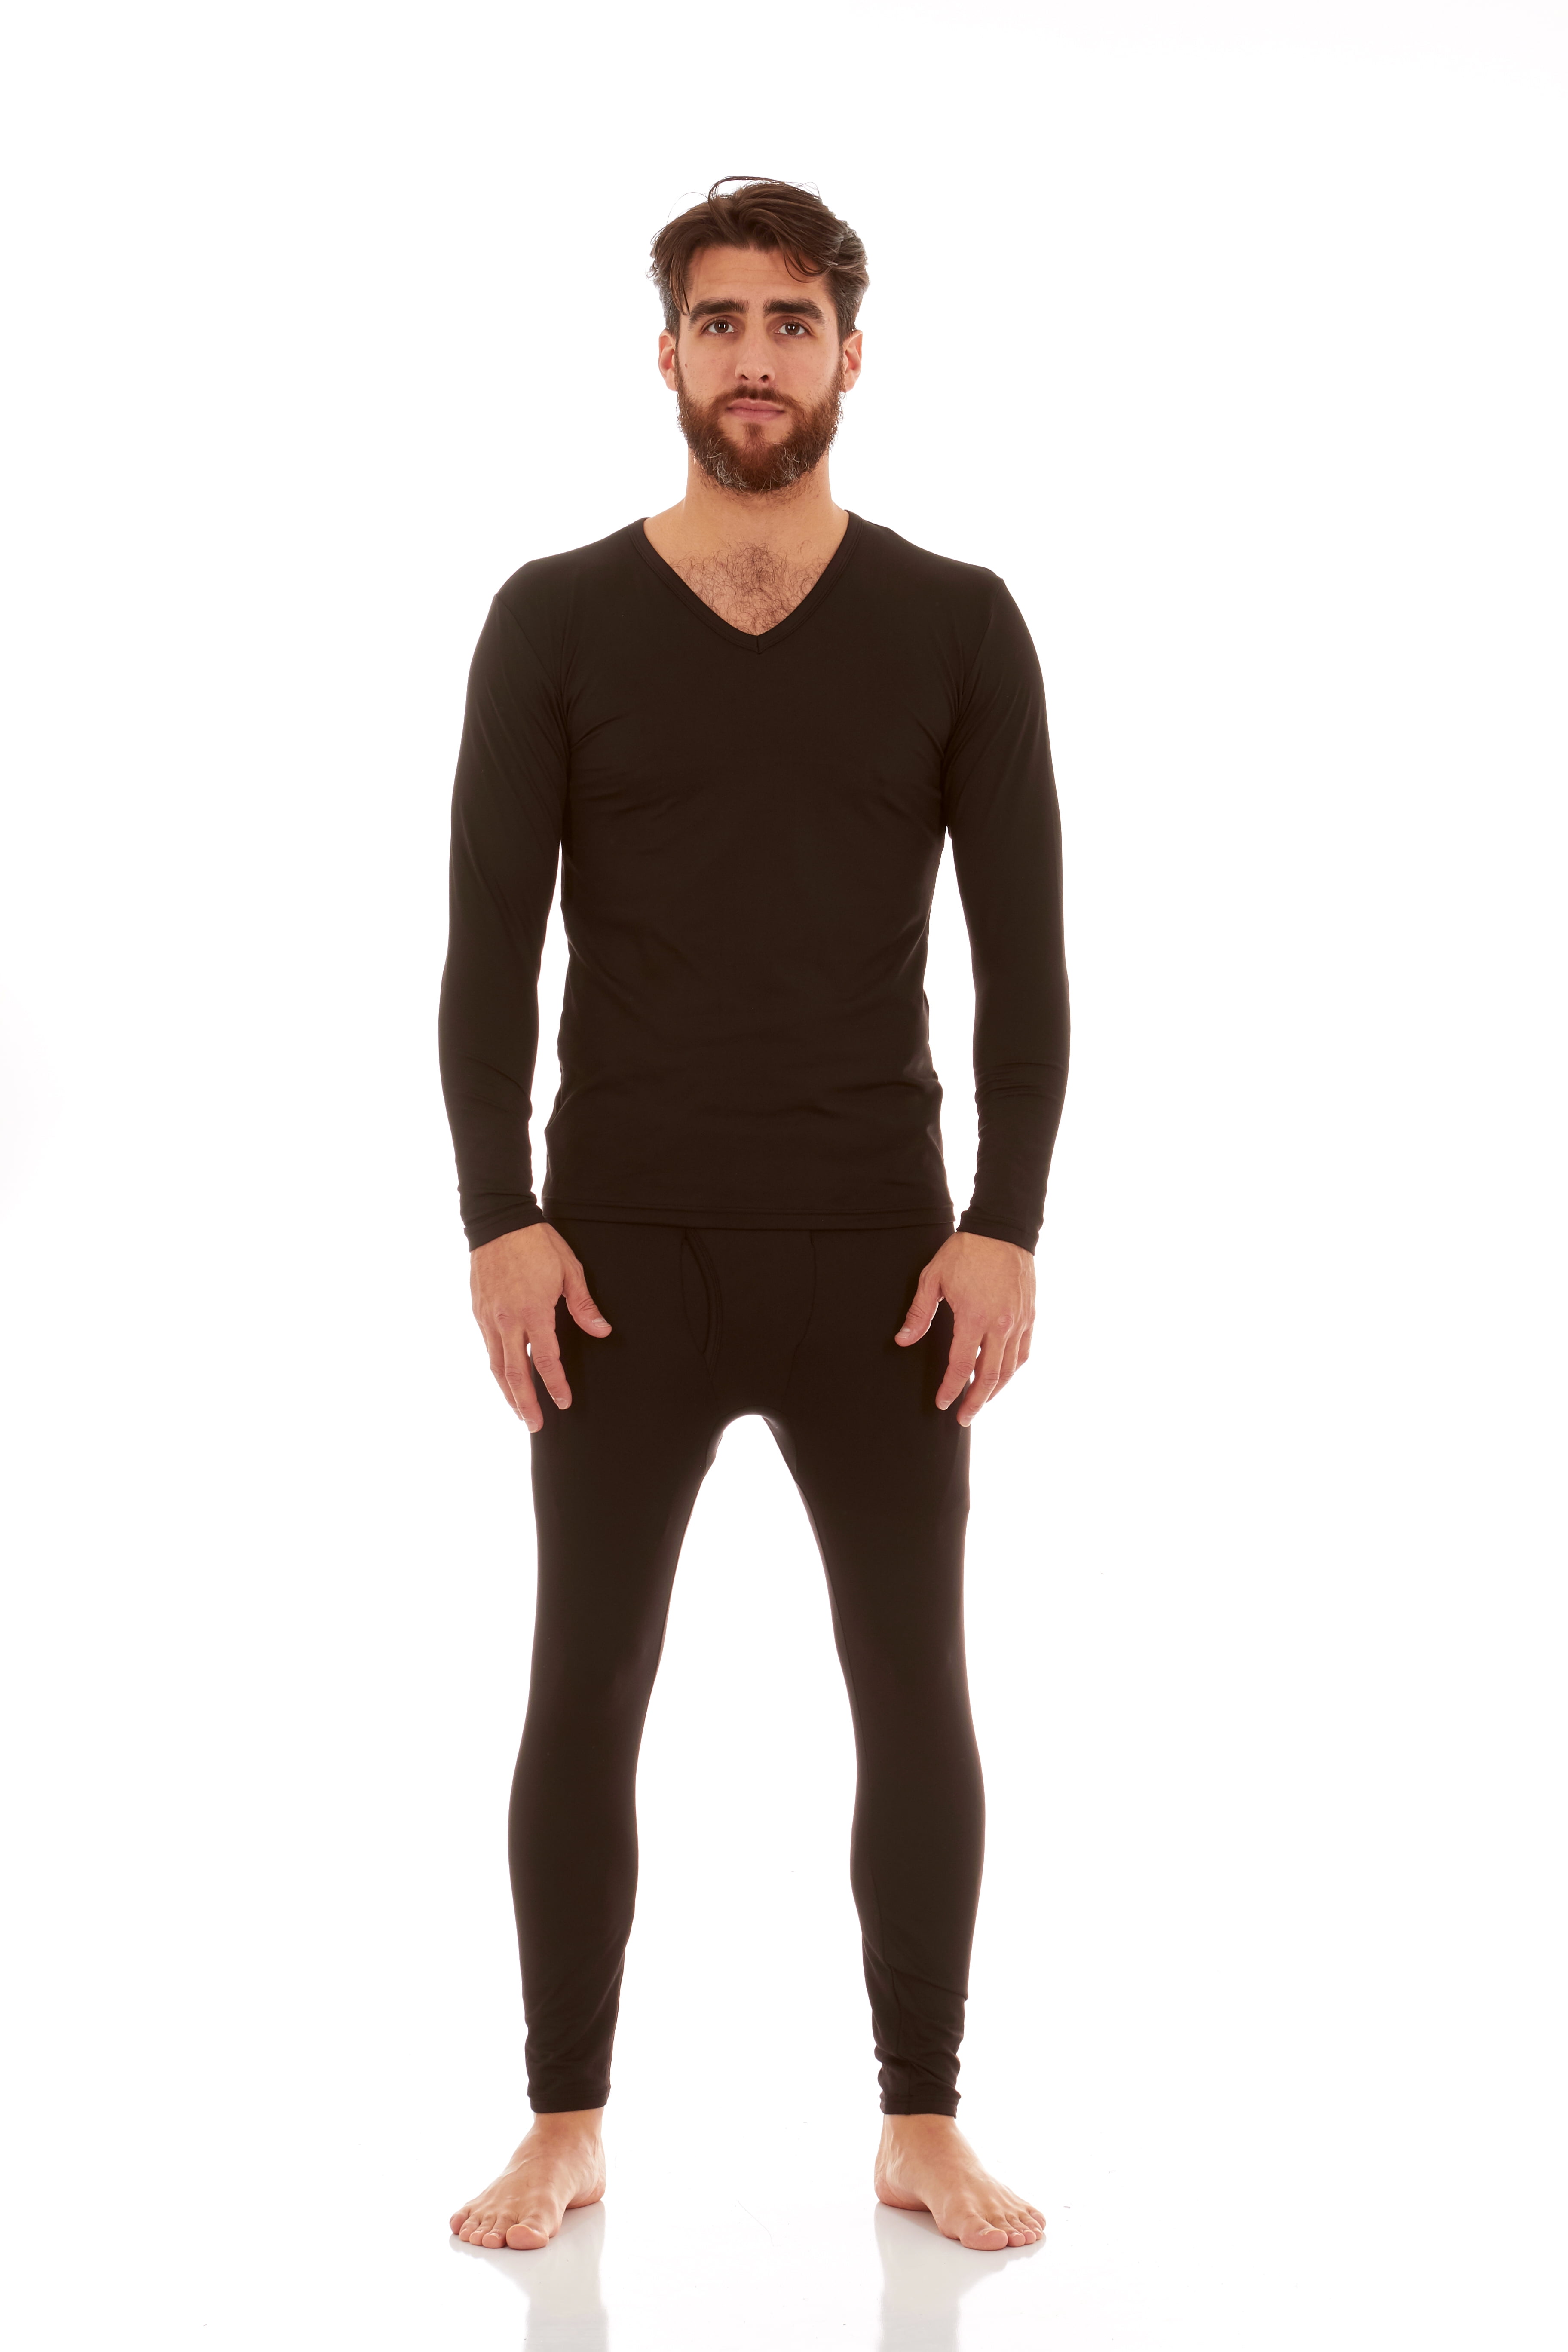 Thermajohn Men's Ultra Soft V-Neck Thermal Underwear with Fleece Lined ...